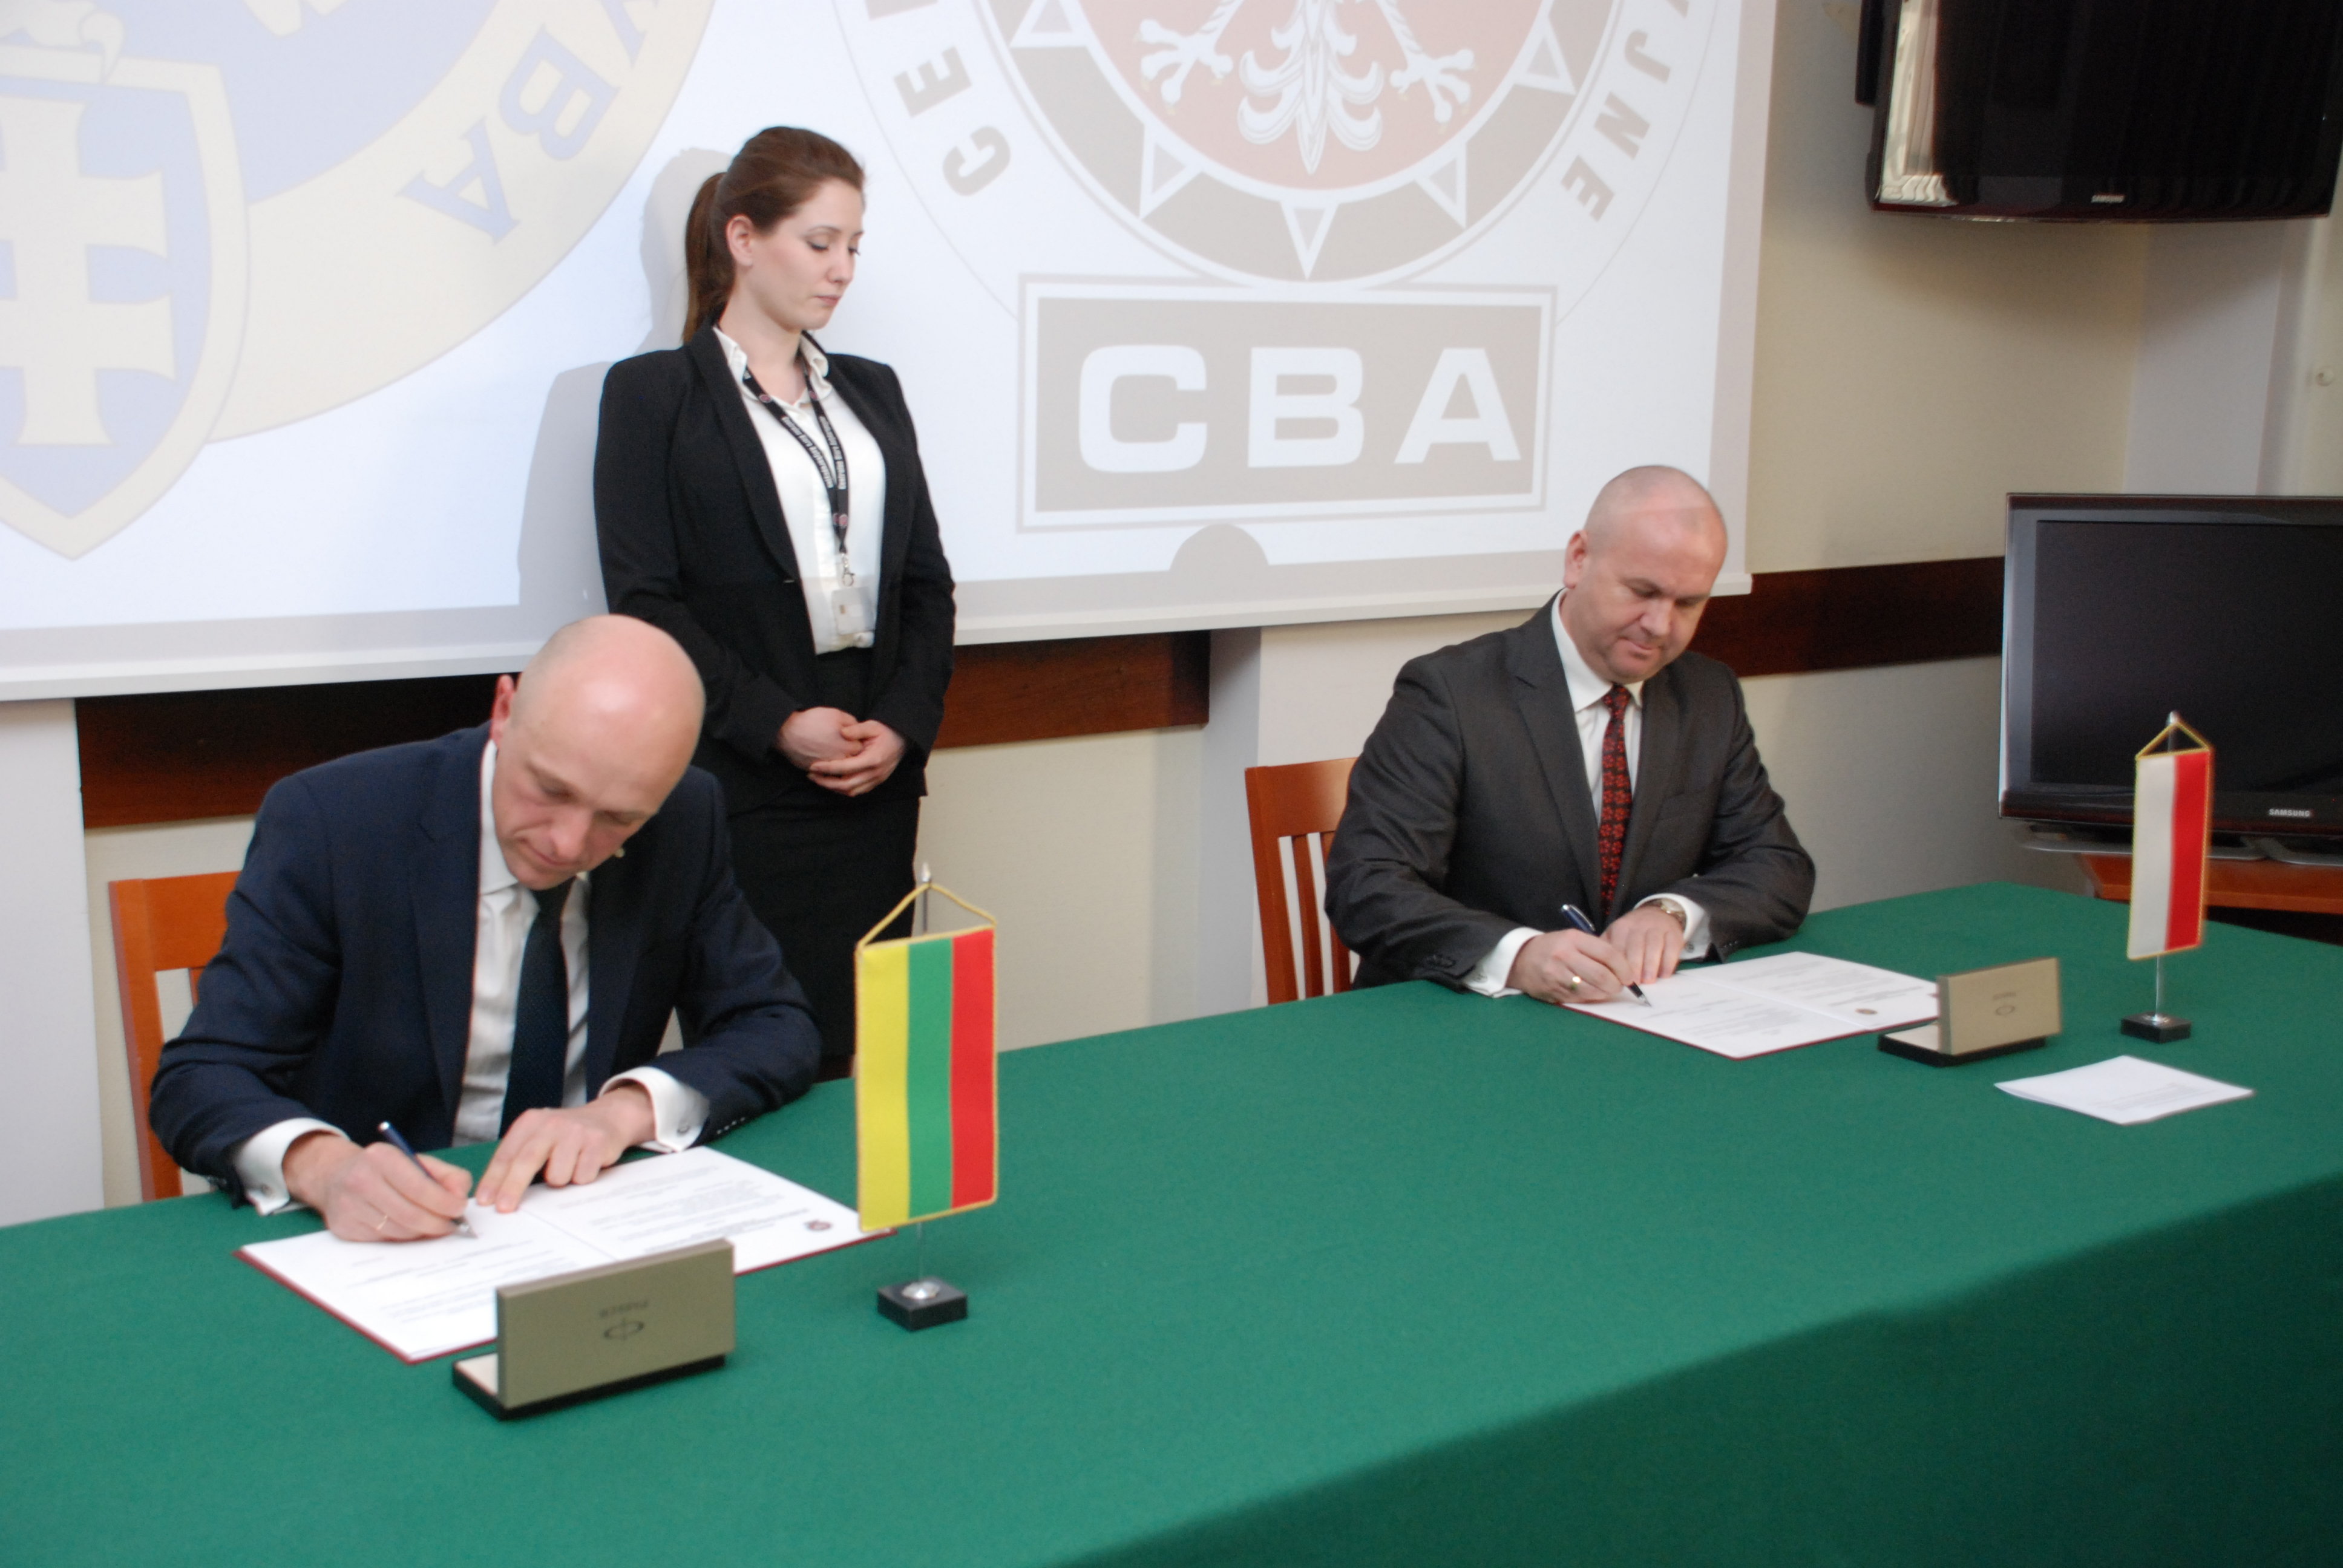 The Head of the Central Anticorruption Bureau and the Director of the Special Investigation Service of the Republic of Lithuania sign a cooperation agreement